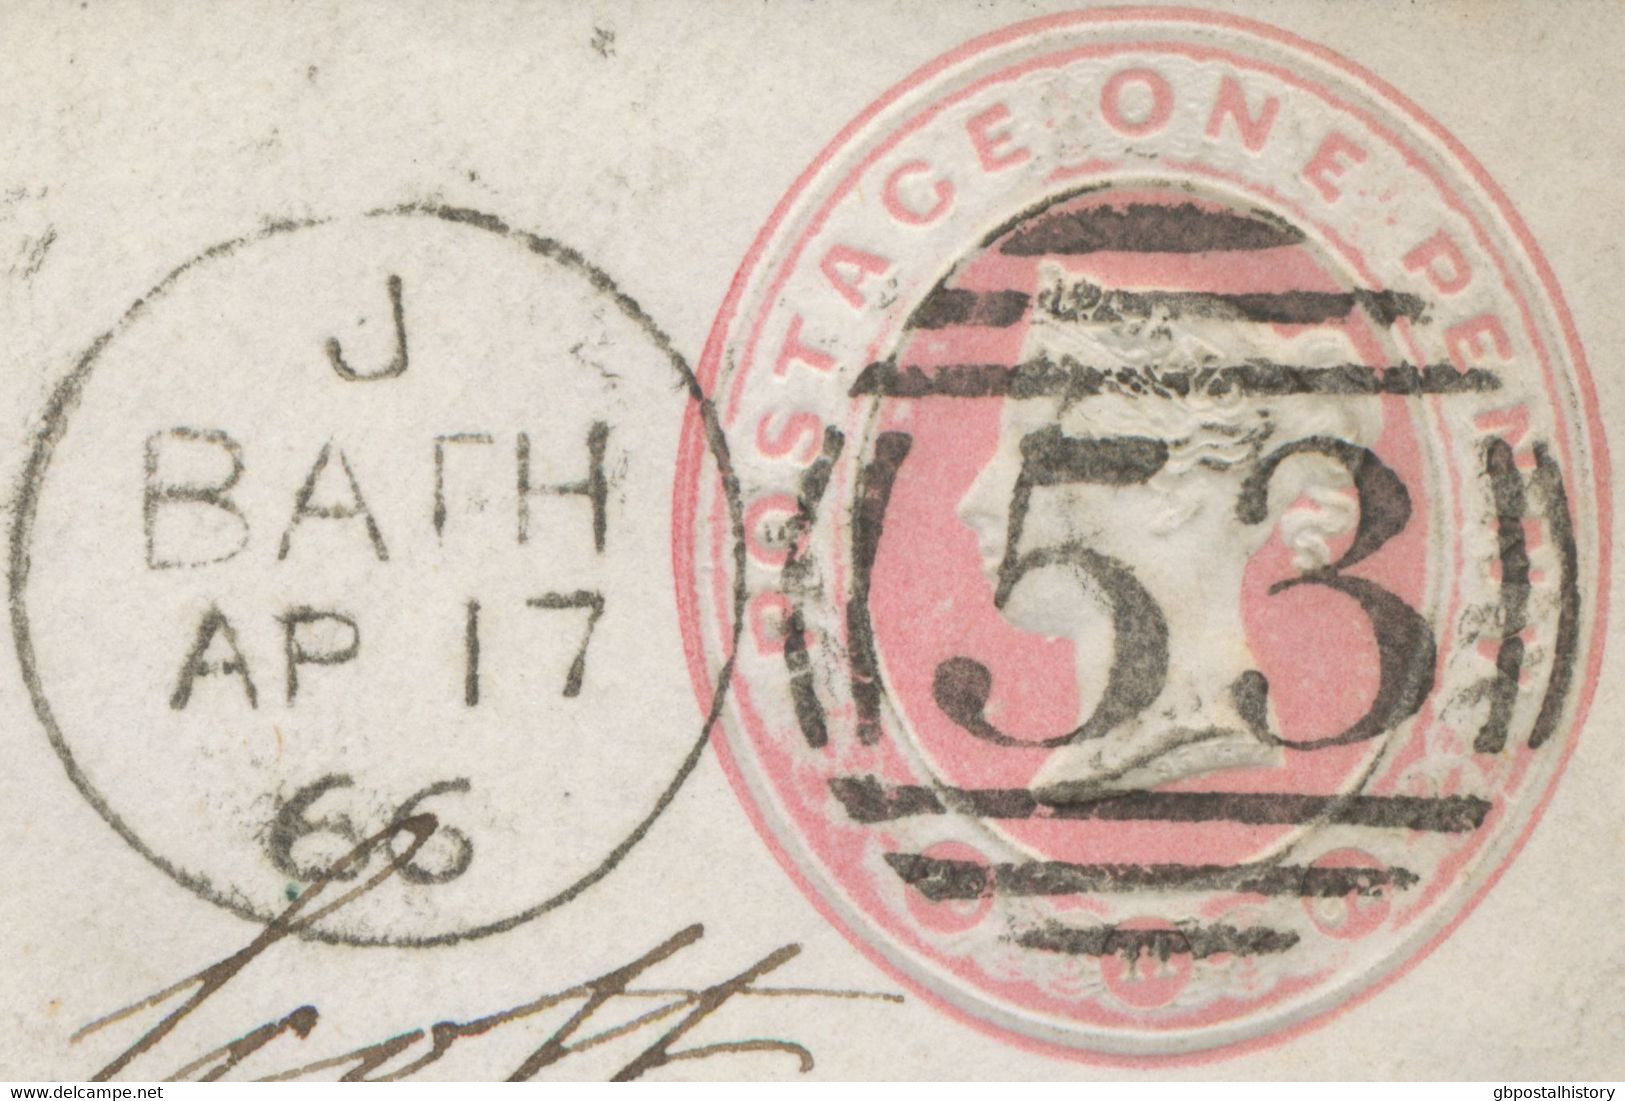 GB „53 / BATH“ Duplex Postmark On Superb Rare QV 1d Pink Stamped To Order Postal Stationery Envelope (size B, Dated 20 1 - Covers & Documents